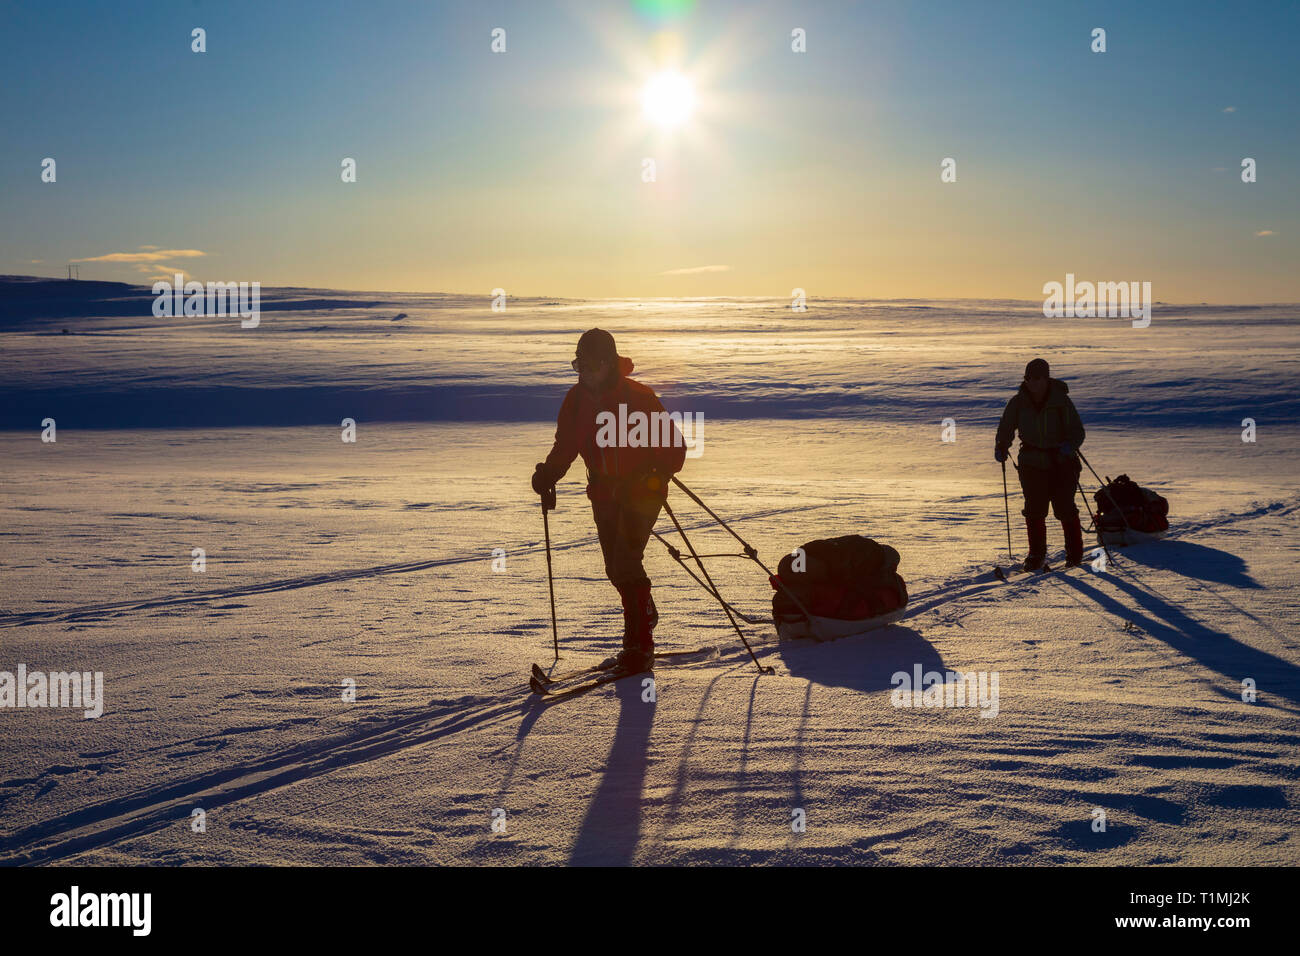 Cross country ski touring group crossing the Finnmarksvidda Plateau. Finnmark, Arctic Norway. Stock Photo